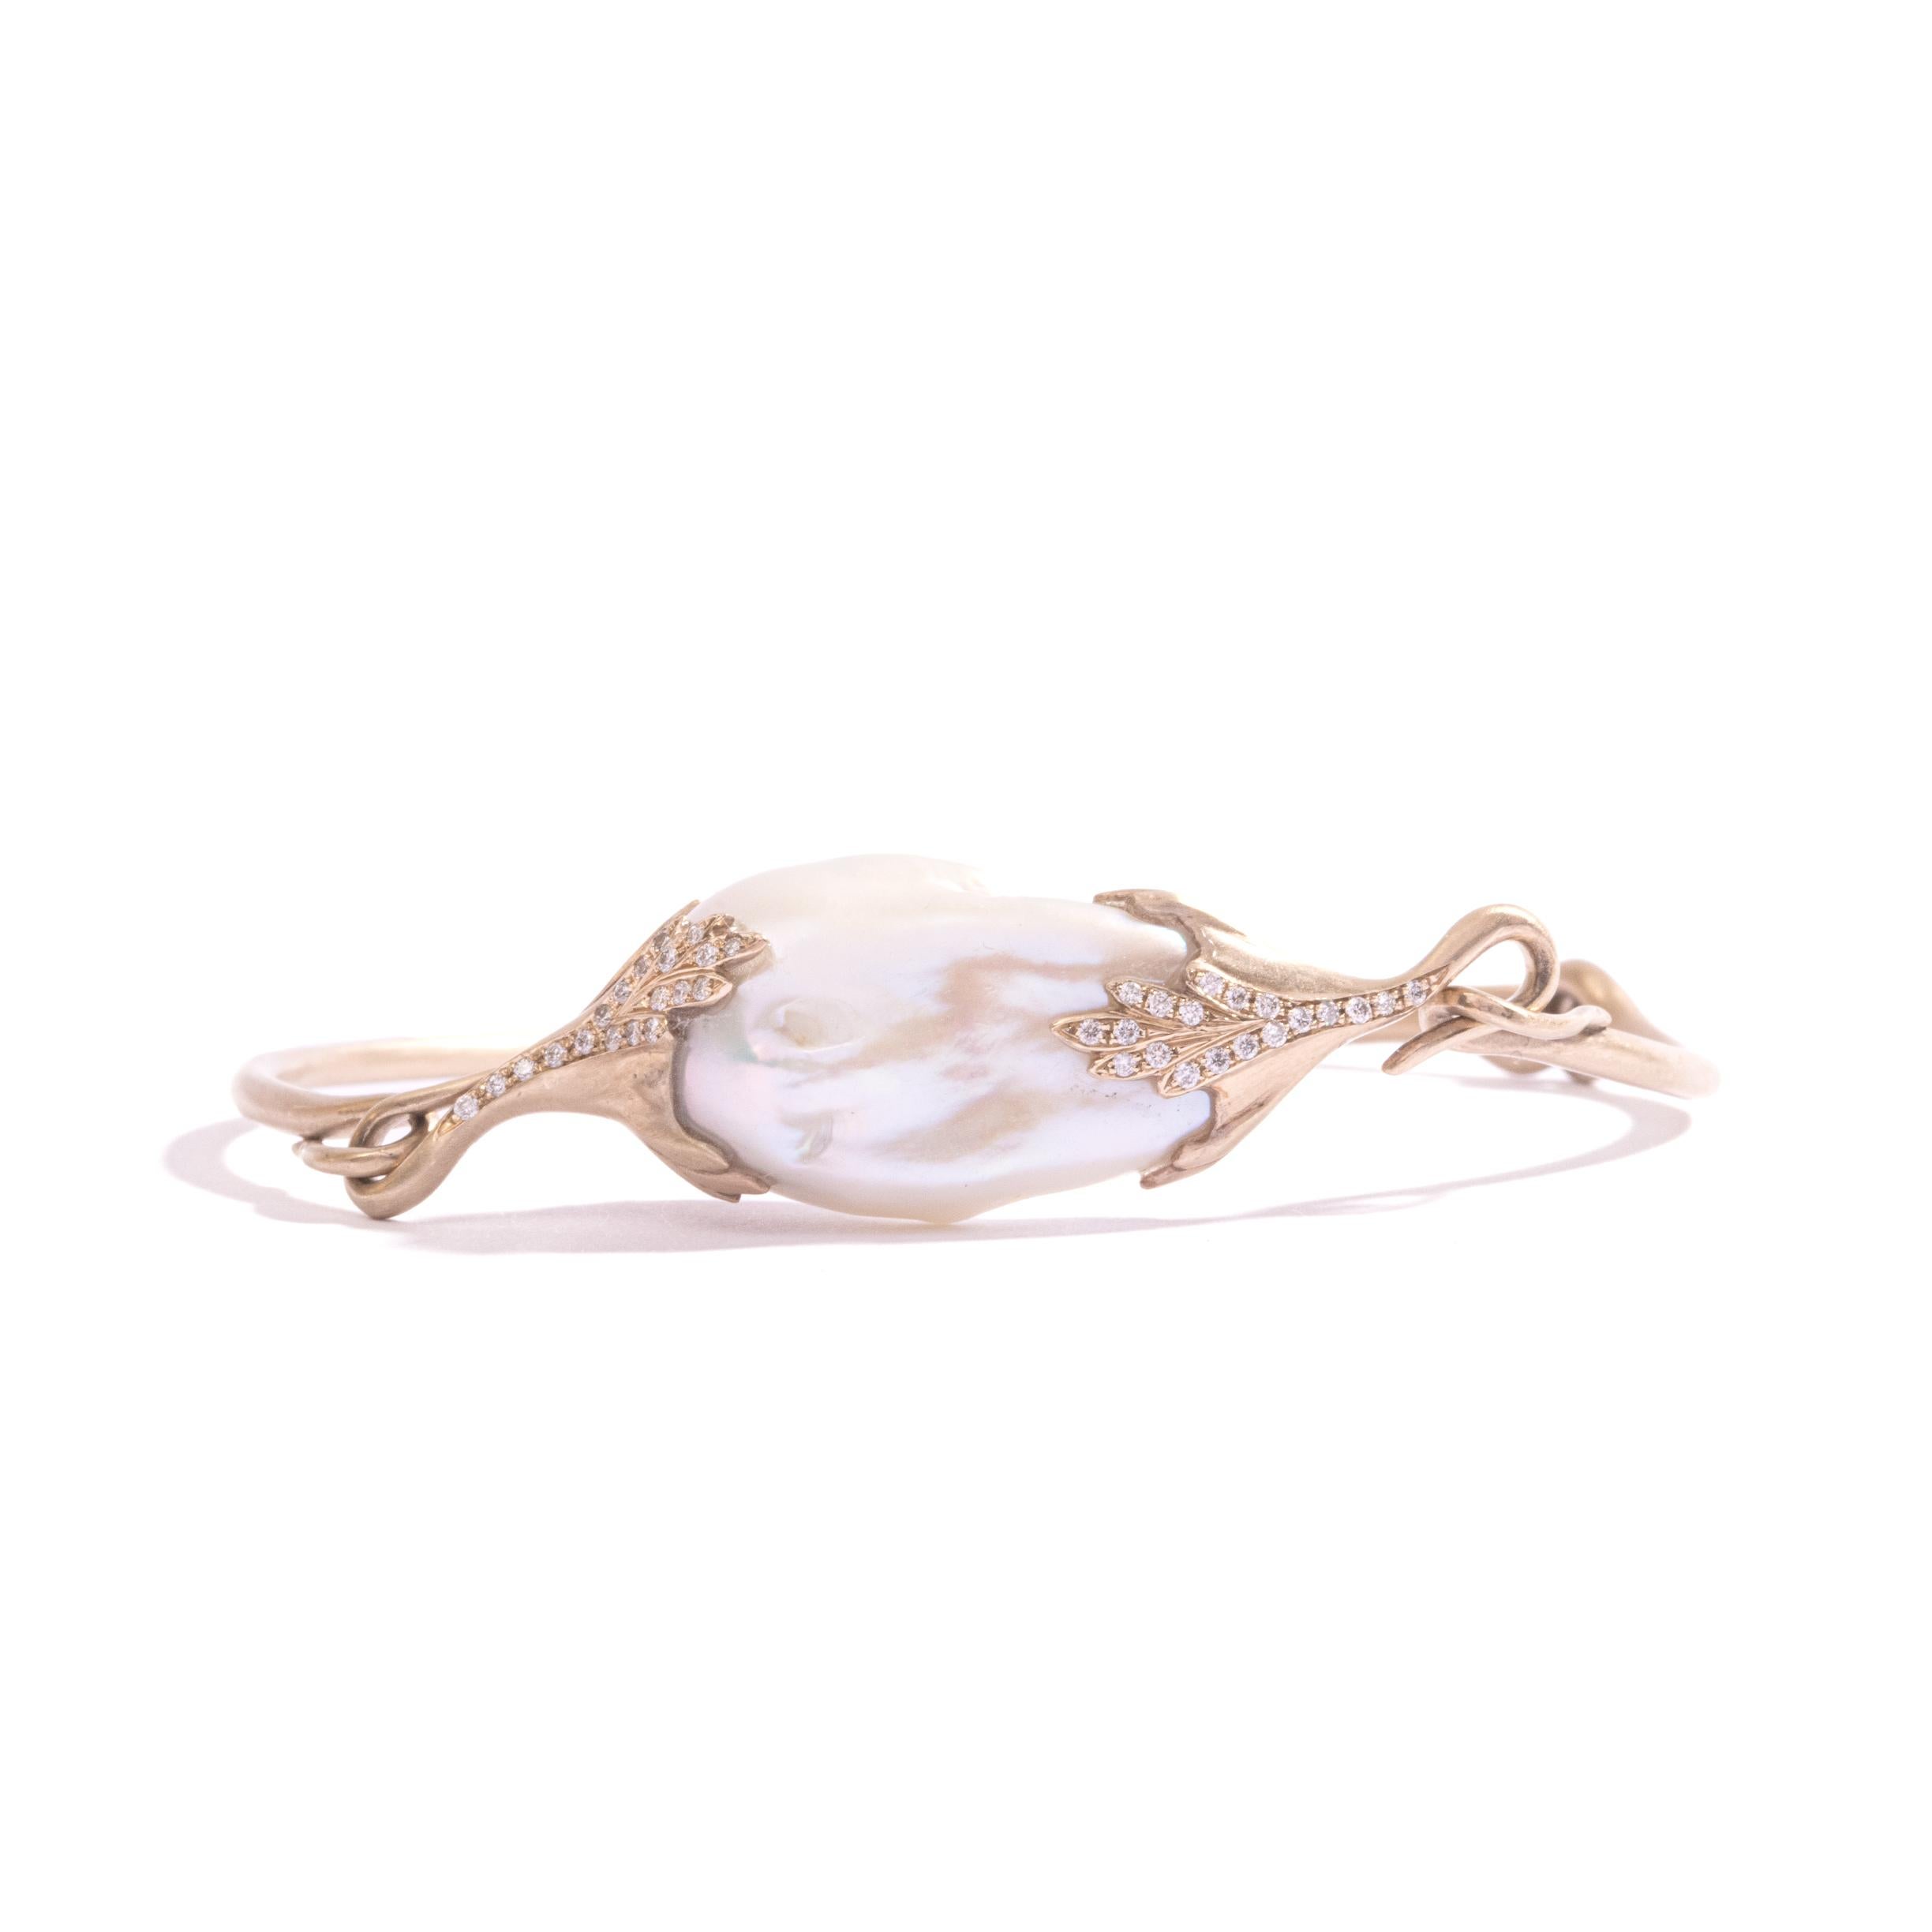 Bud Bracelet by Regina Gambatesa at Second Petale Gallery

About the Gemstones:

Gold 18 kt, white gold
Diamonds ct. 0,21
Pearl

ABOUT the CREATOR
REGINA GAMBATESA : AN ARTIST OF SPIRIT AND FORM
Regina Gambatesa is a jewelry artist who strives to